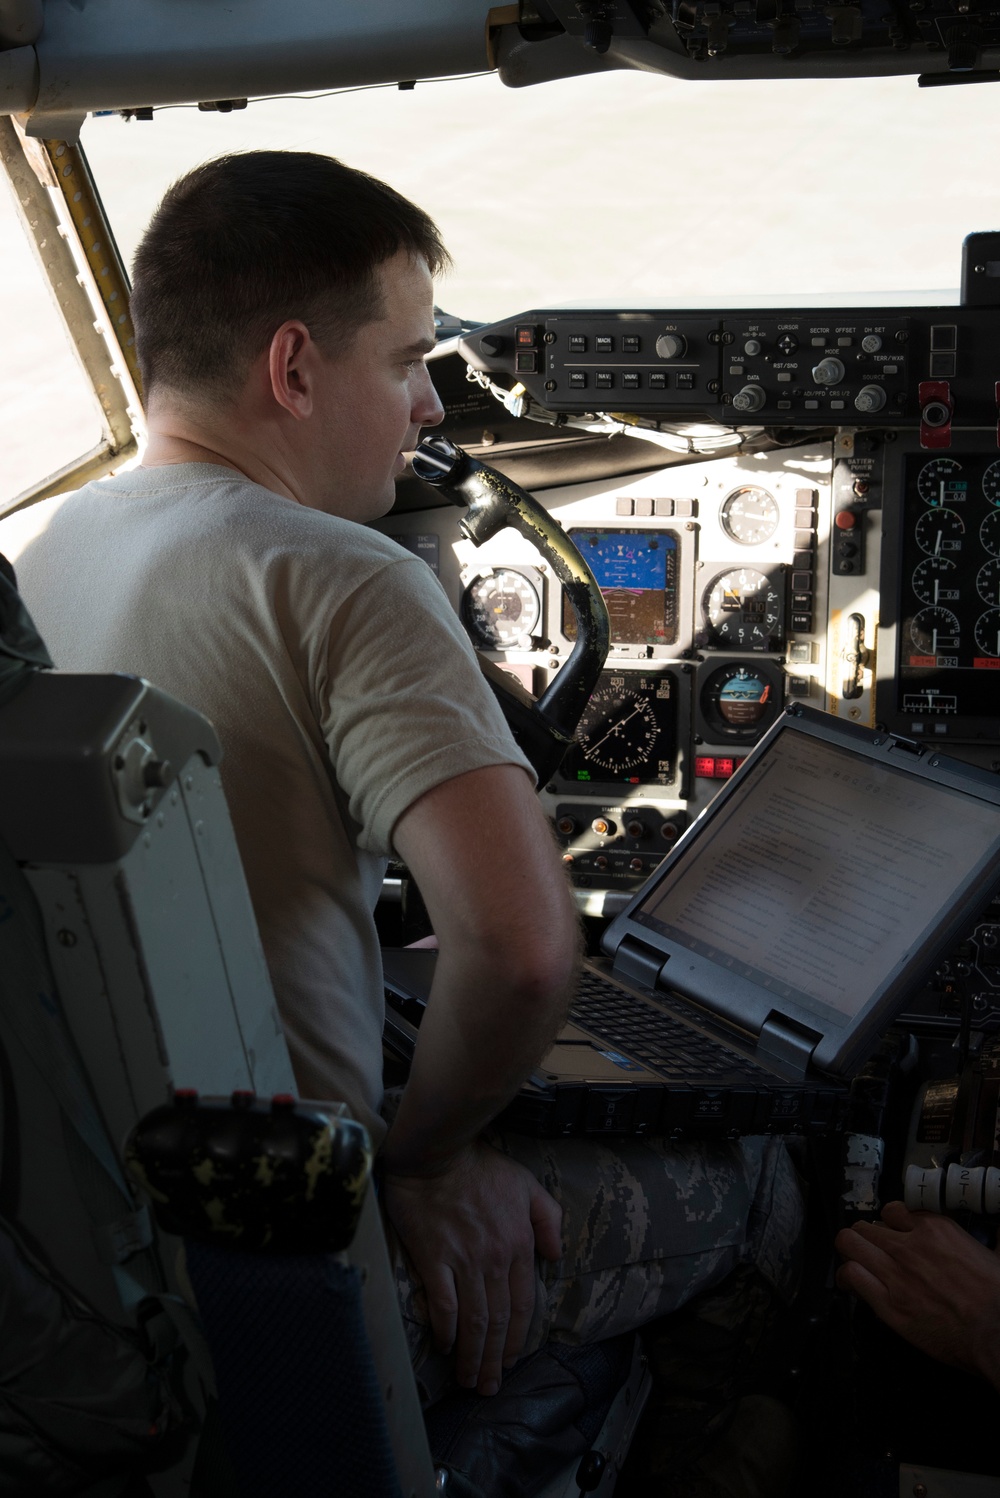 Out with analog and in with digital: KC-135s are being upgraded